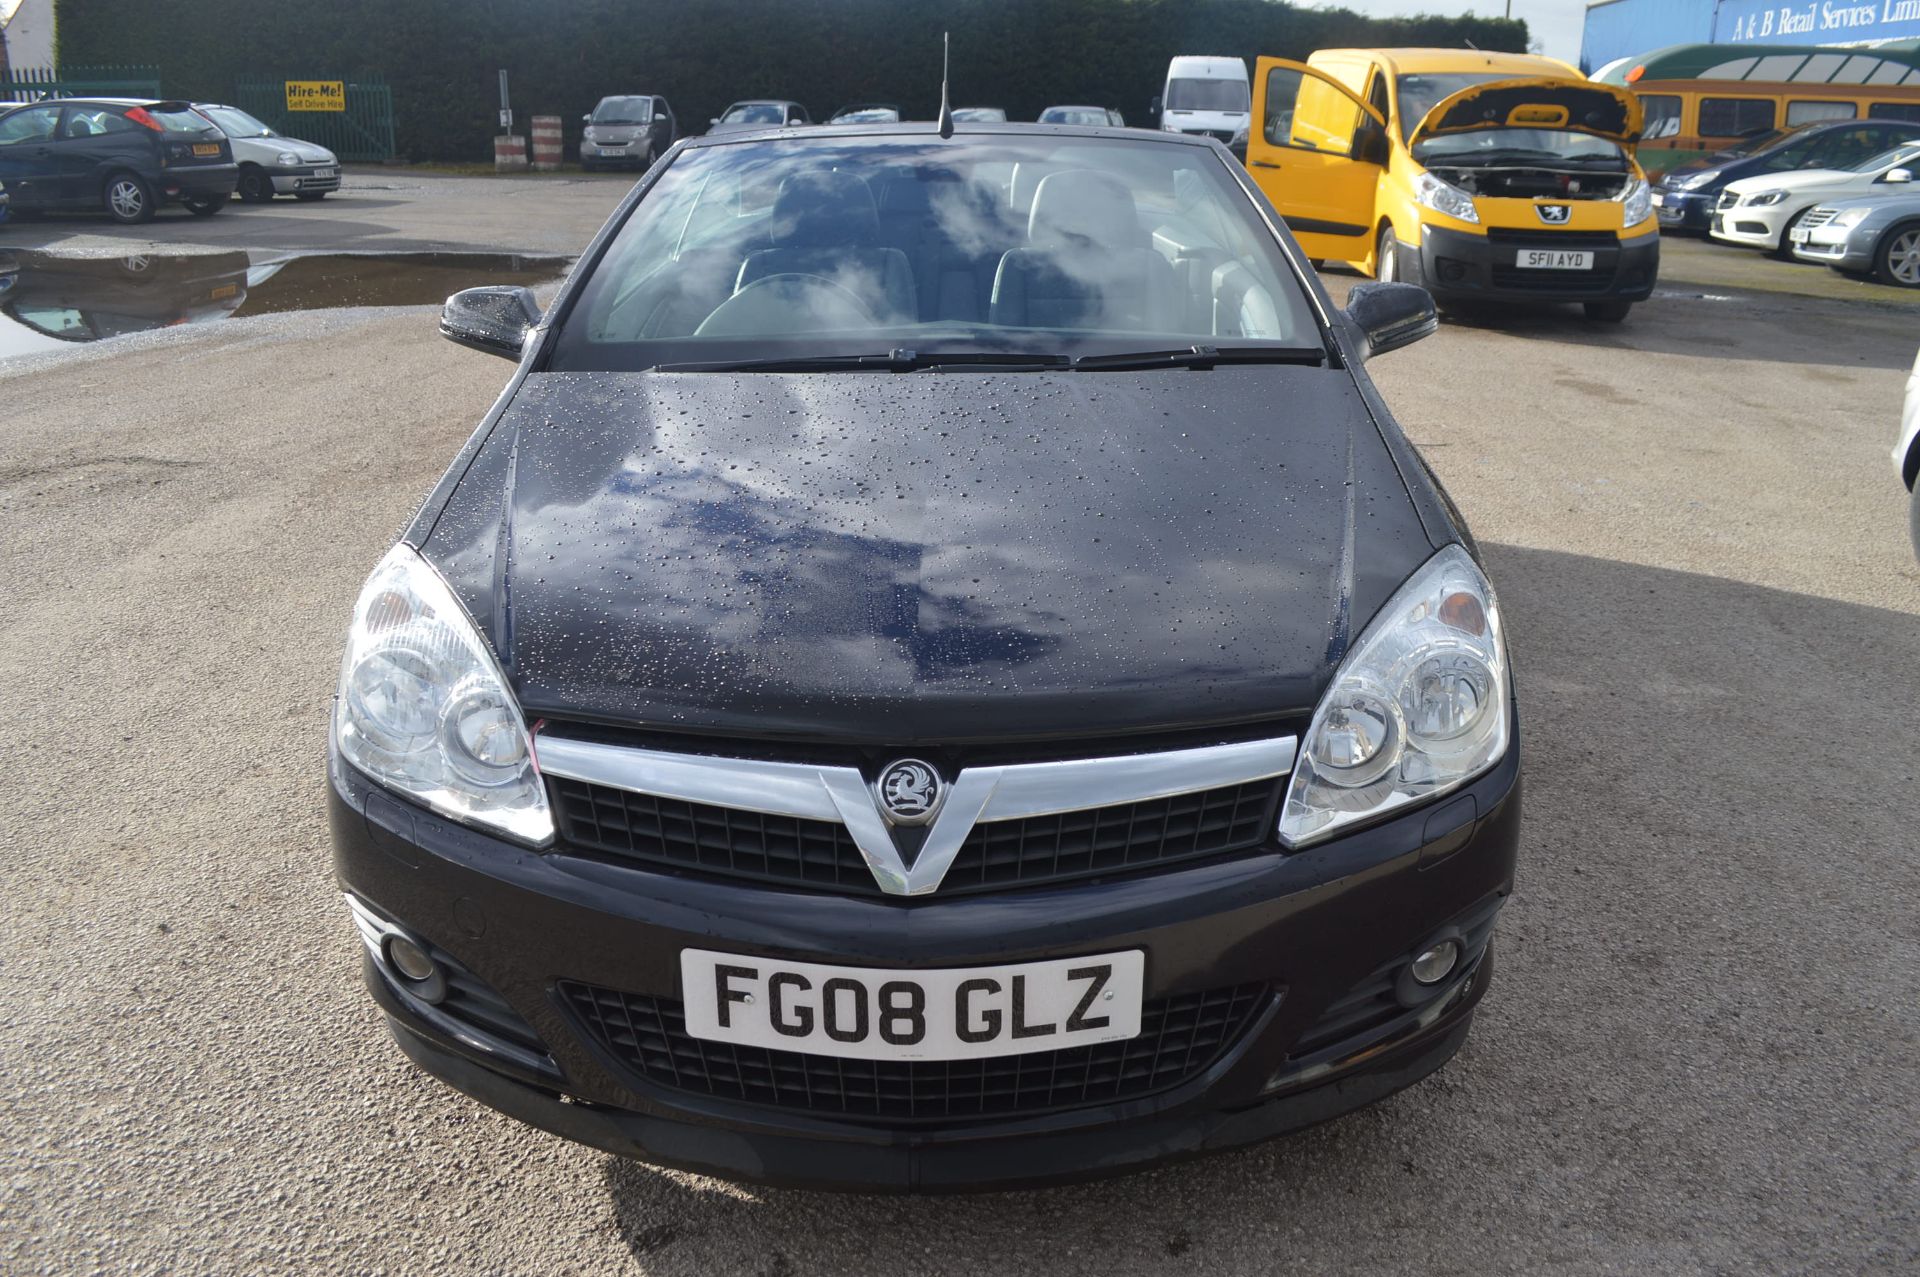 2008/08 REG VAUXHALL ASTRA T-TOP DESIGN CDTI - ROOF CAN BE PUT DOWN/UP WITH THE KEY   DATE OF - Image 2 of 20